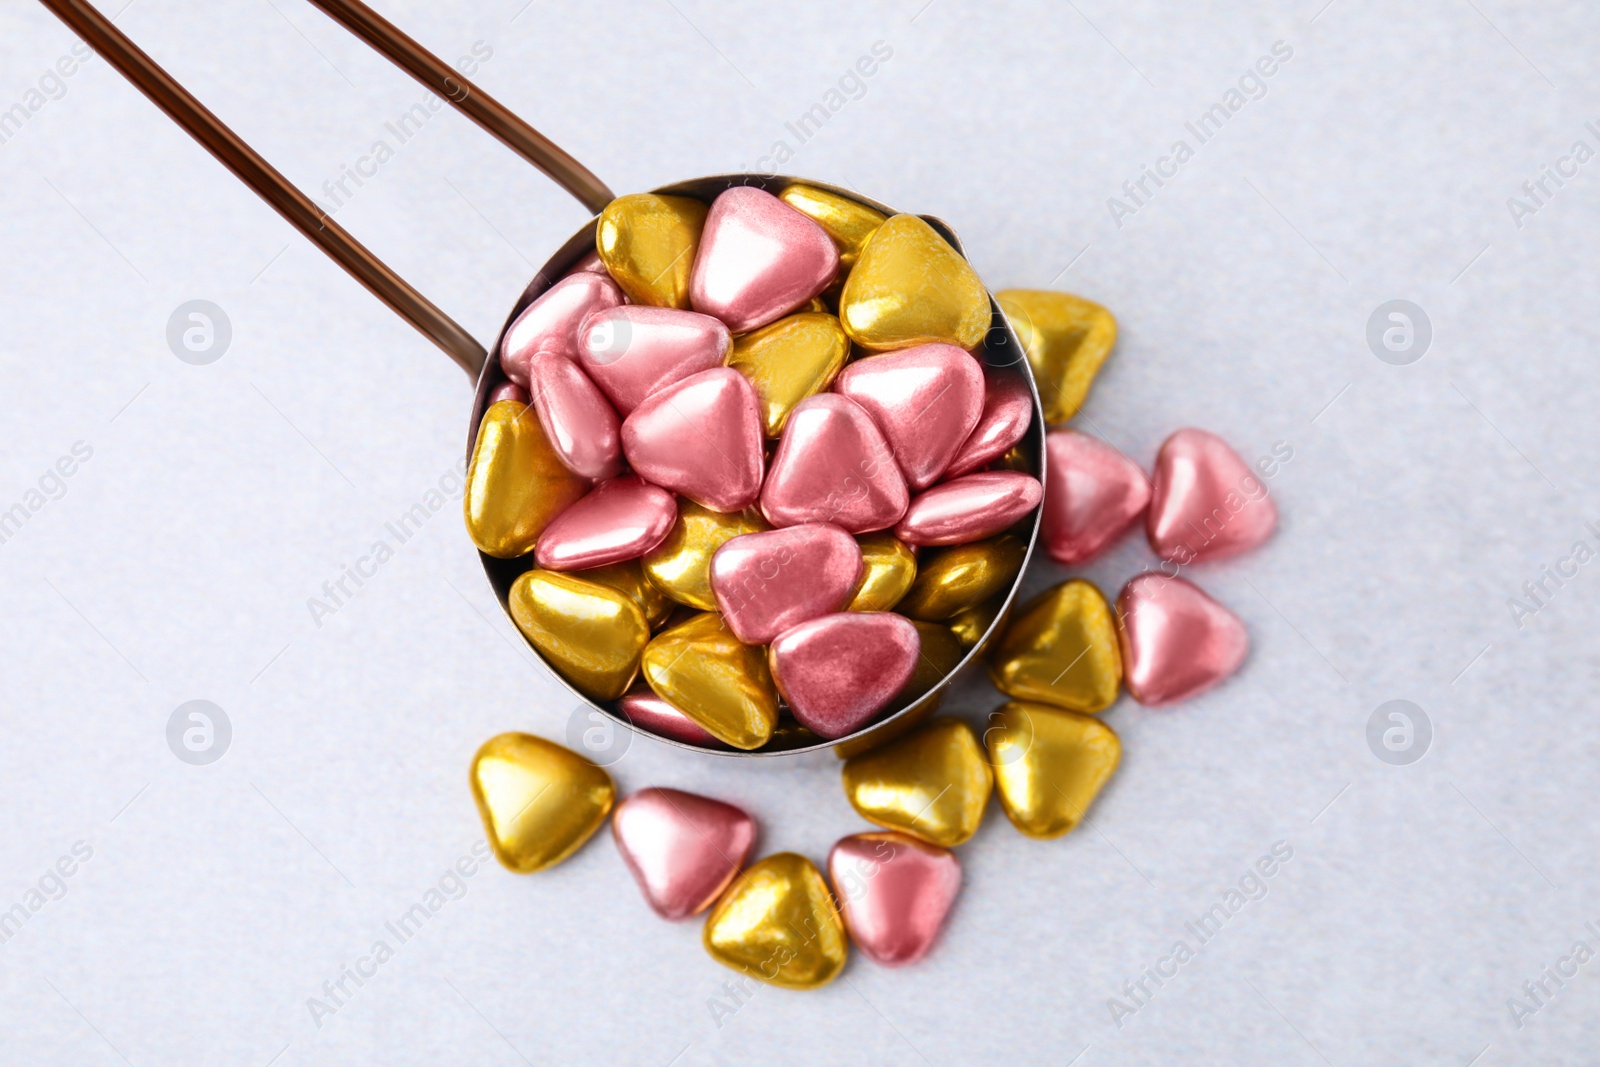 Photo of Metal scoop and delicious heart shaped candies on white table, flat lay